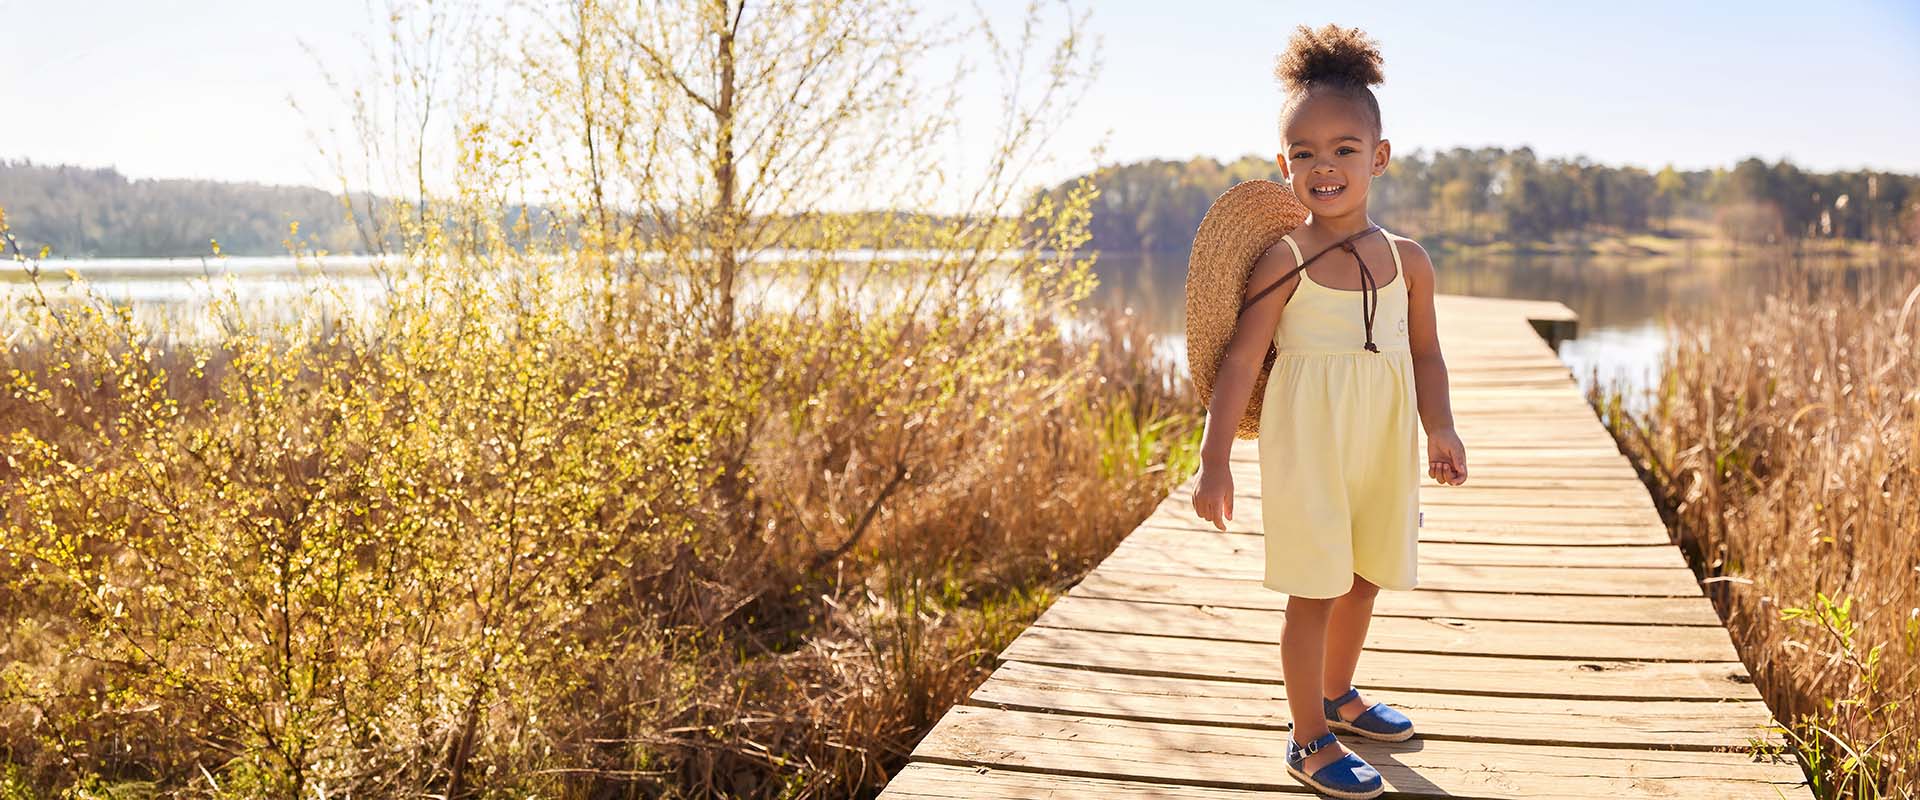 A young girl in a yellow romper and blue shoes stands on a wooden dock by a lake, holding a large straw hat. It is a sunny day with a clear blue sky with a lake in the background.